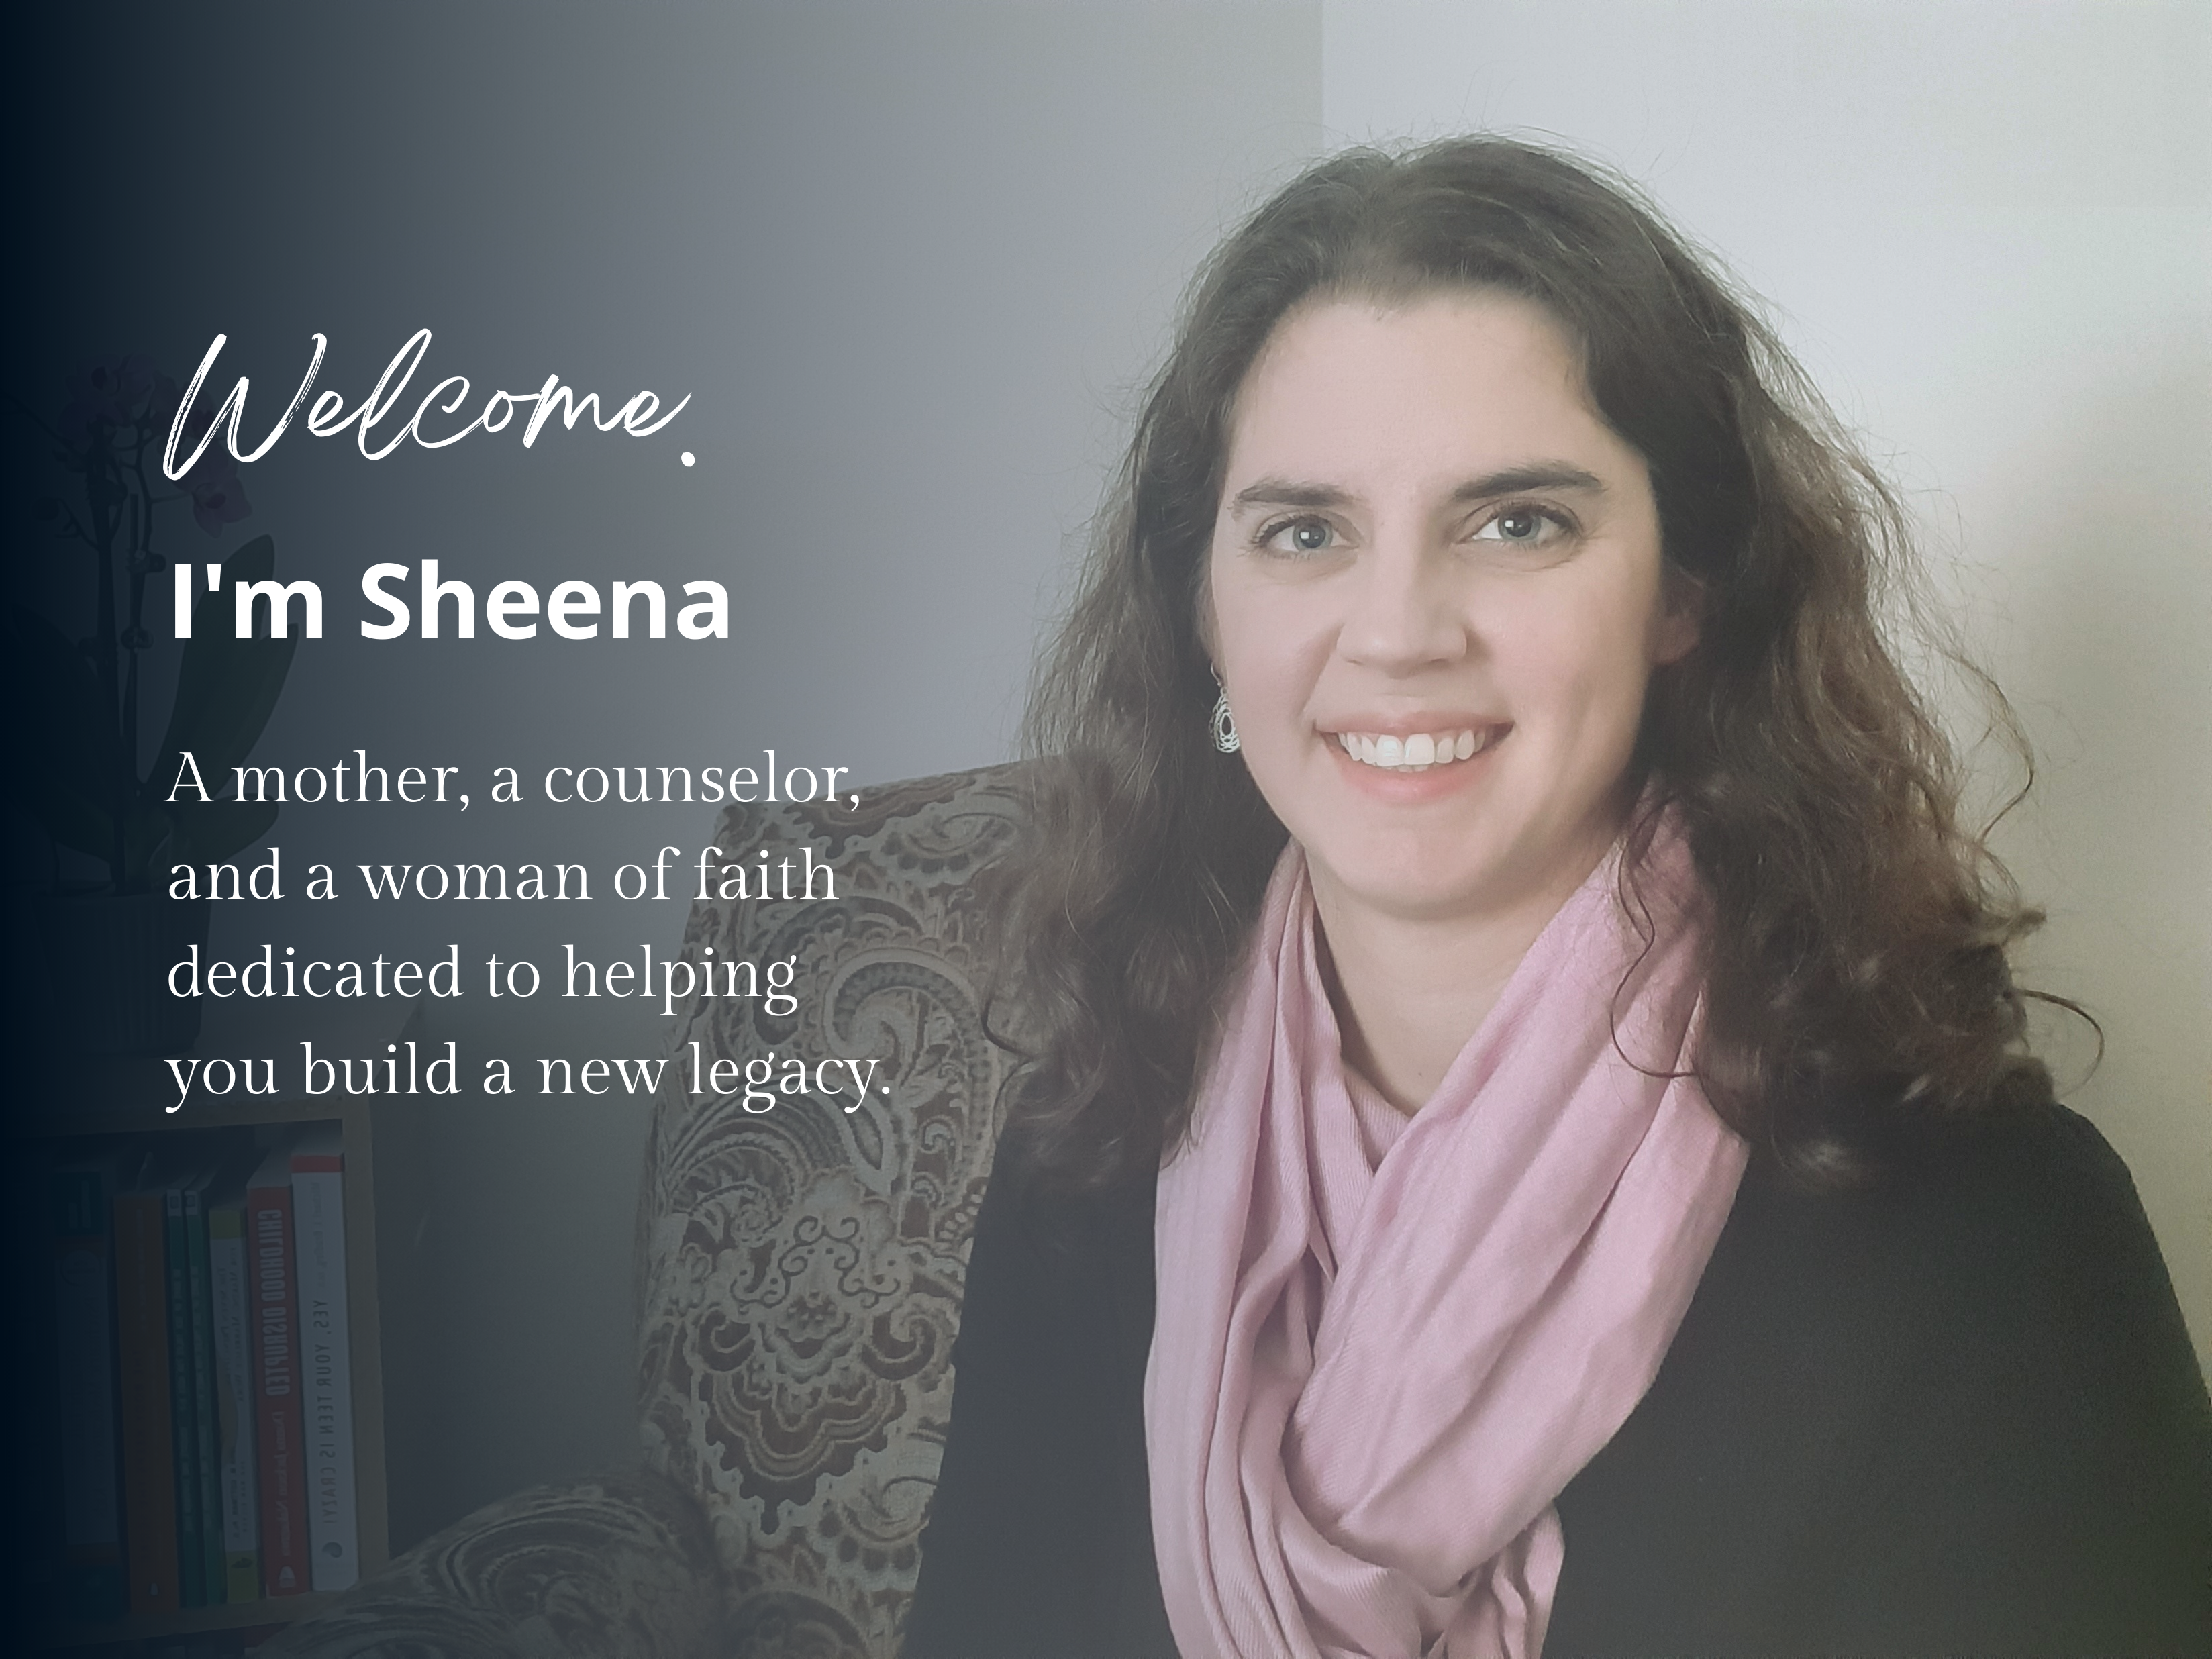 Sheena Kaas is a mother, a counselor, and a woman of faith dedicated to helping you build a new legacy through trauma recovery